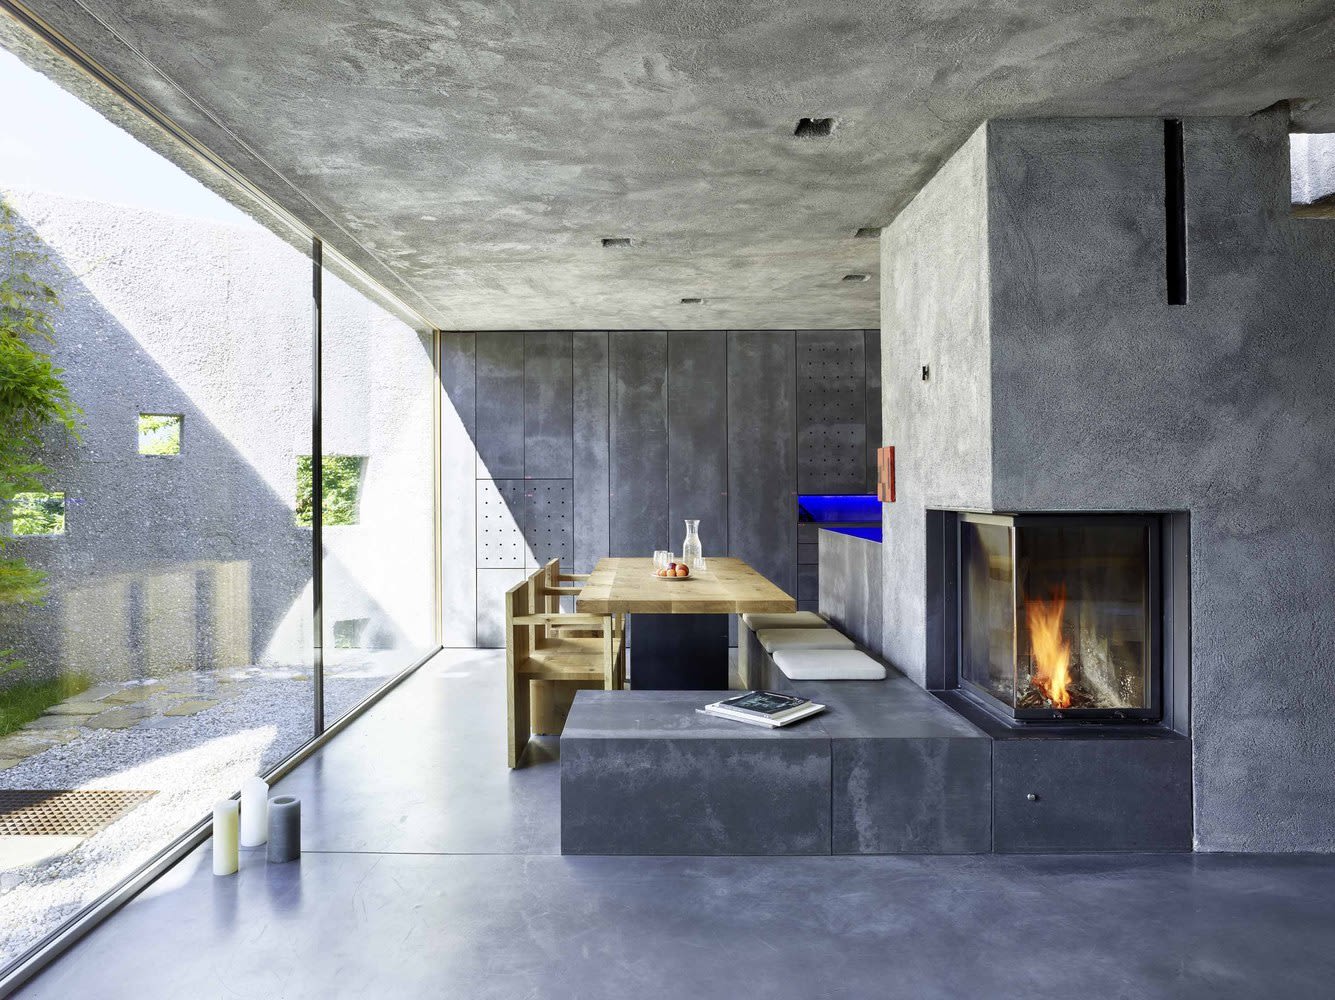 Concrete Benches: Furniture for Inside and Outside the Home